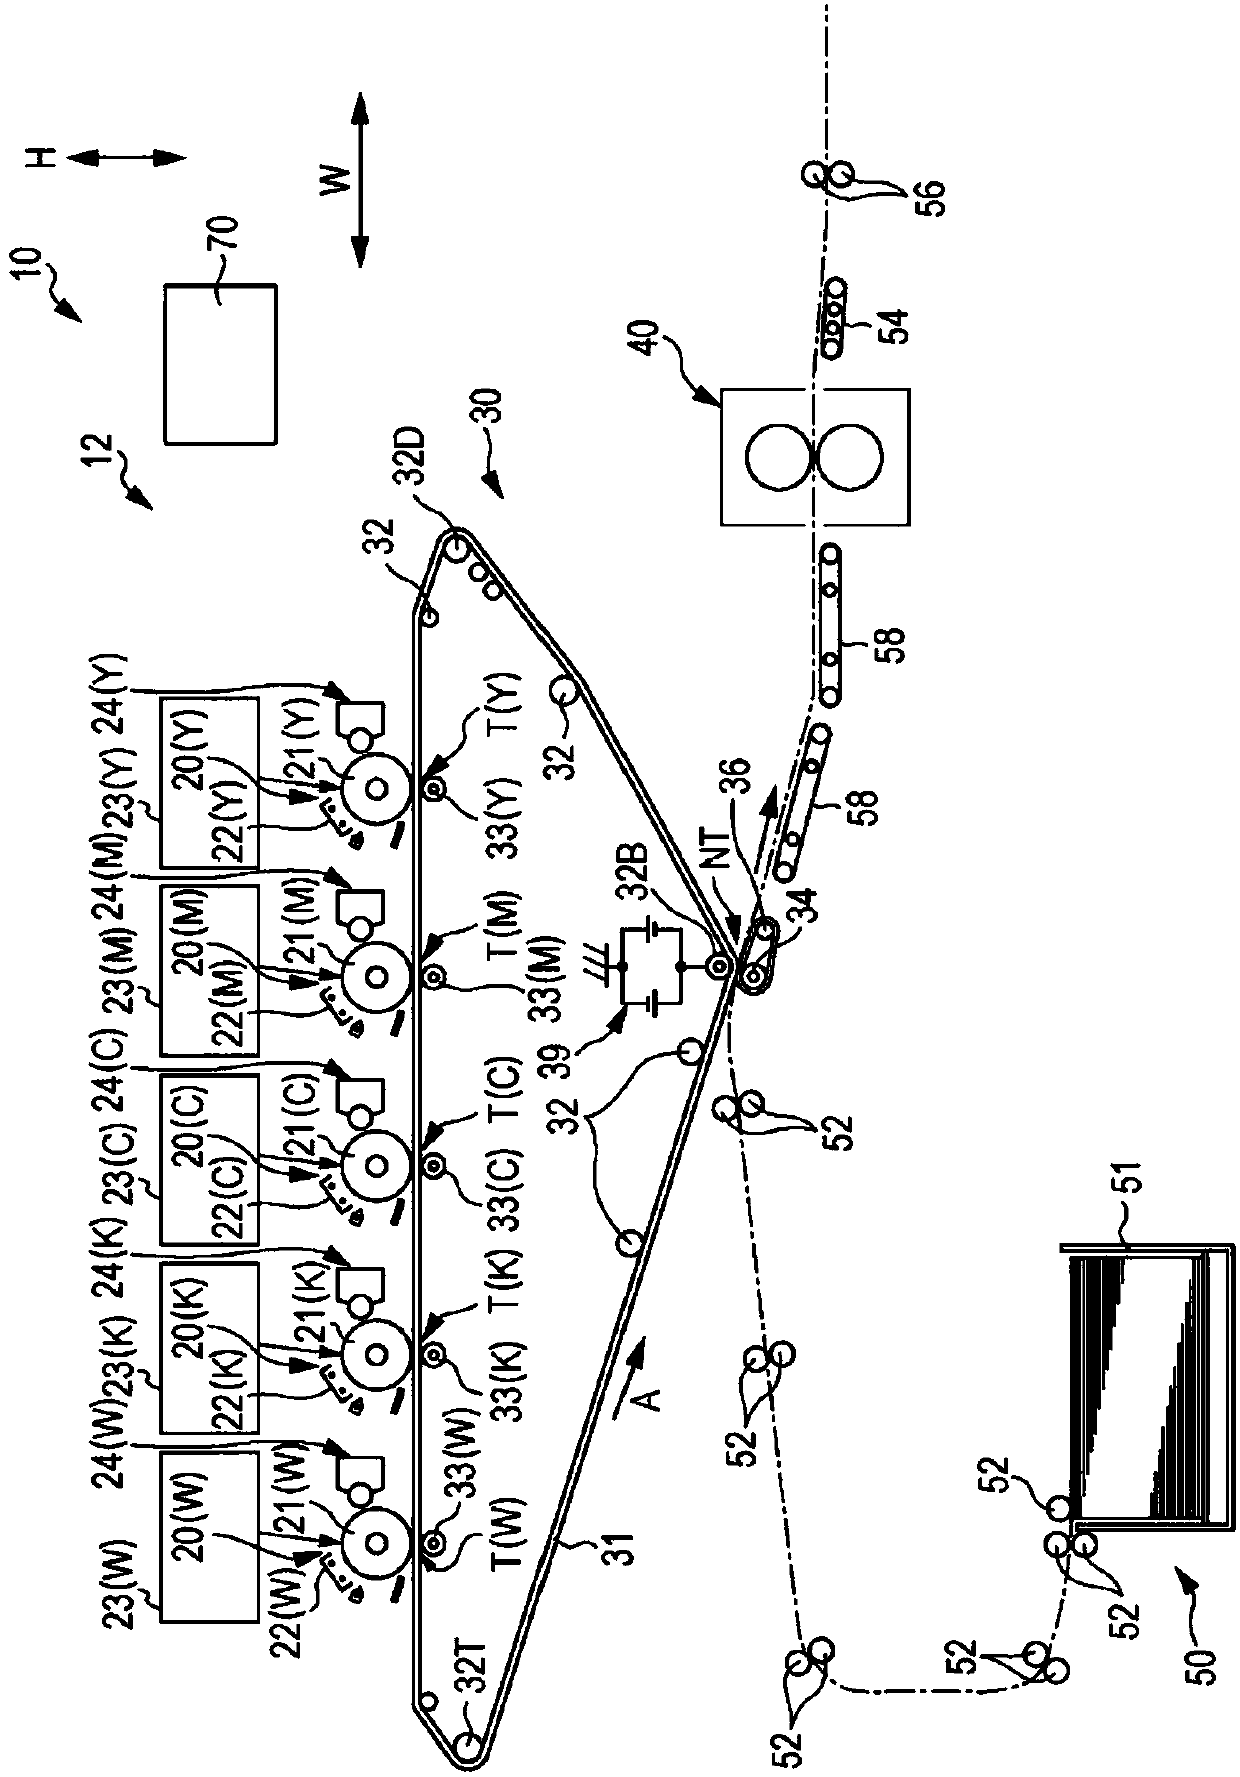 Resin film and image forming apparatus